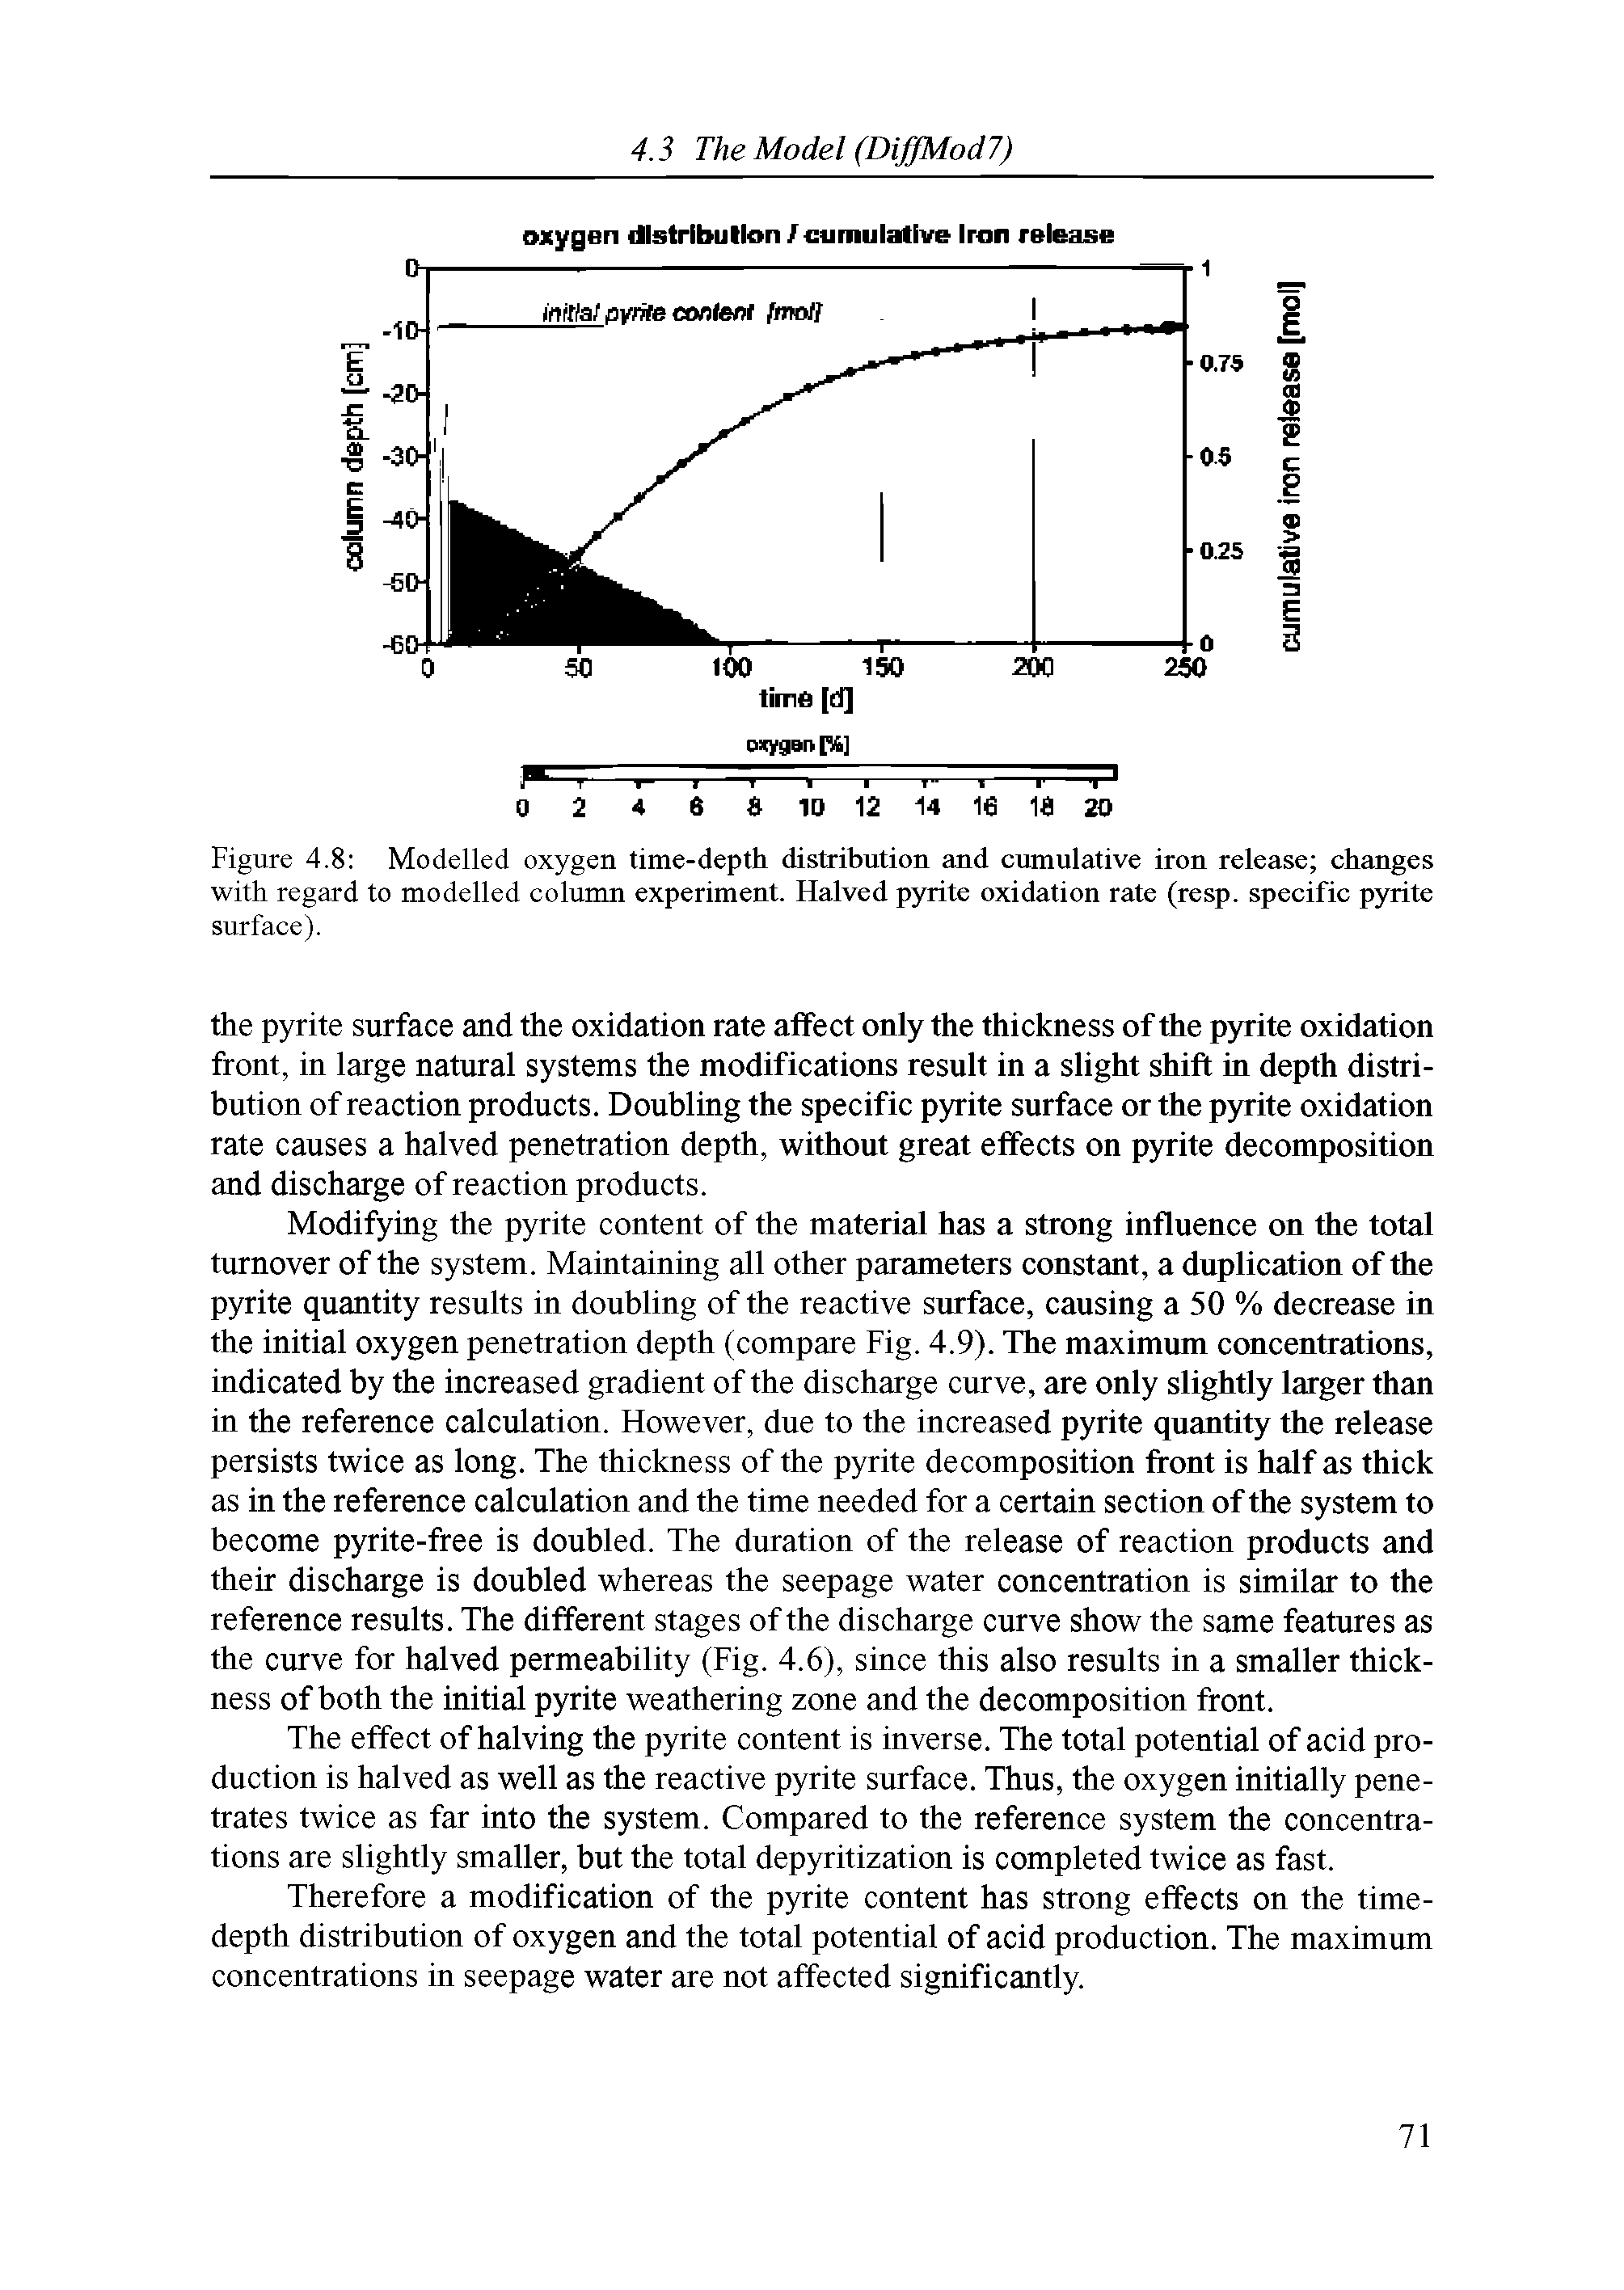 Figure 4.8 Modelled oxygen time-depth distribution and cumulative iron release changes with regard to modelled column experiment. Halved pyrite oxidation rate (resp. specific pyrite surface).